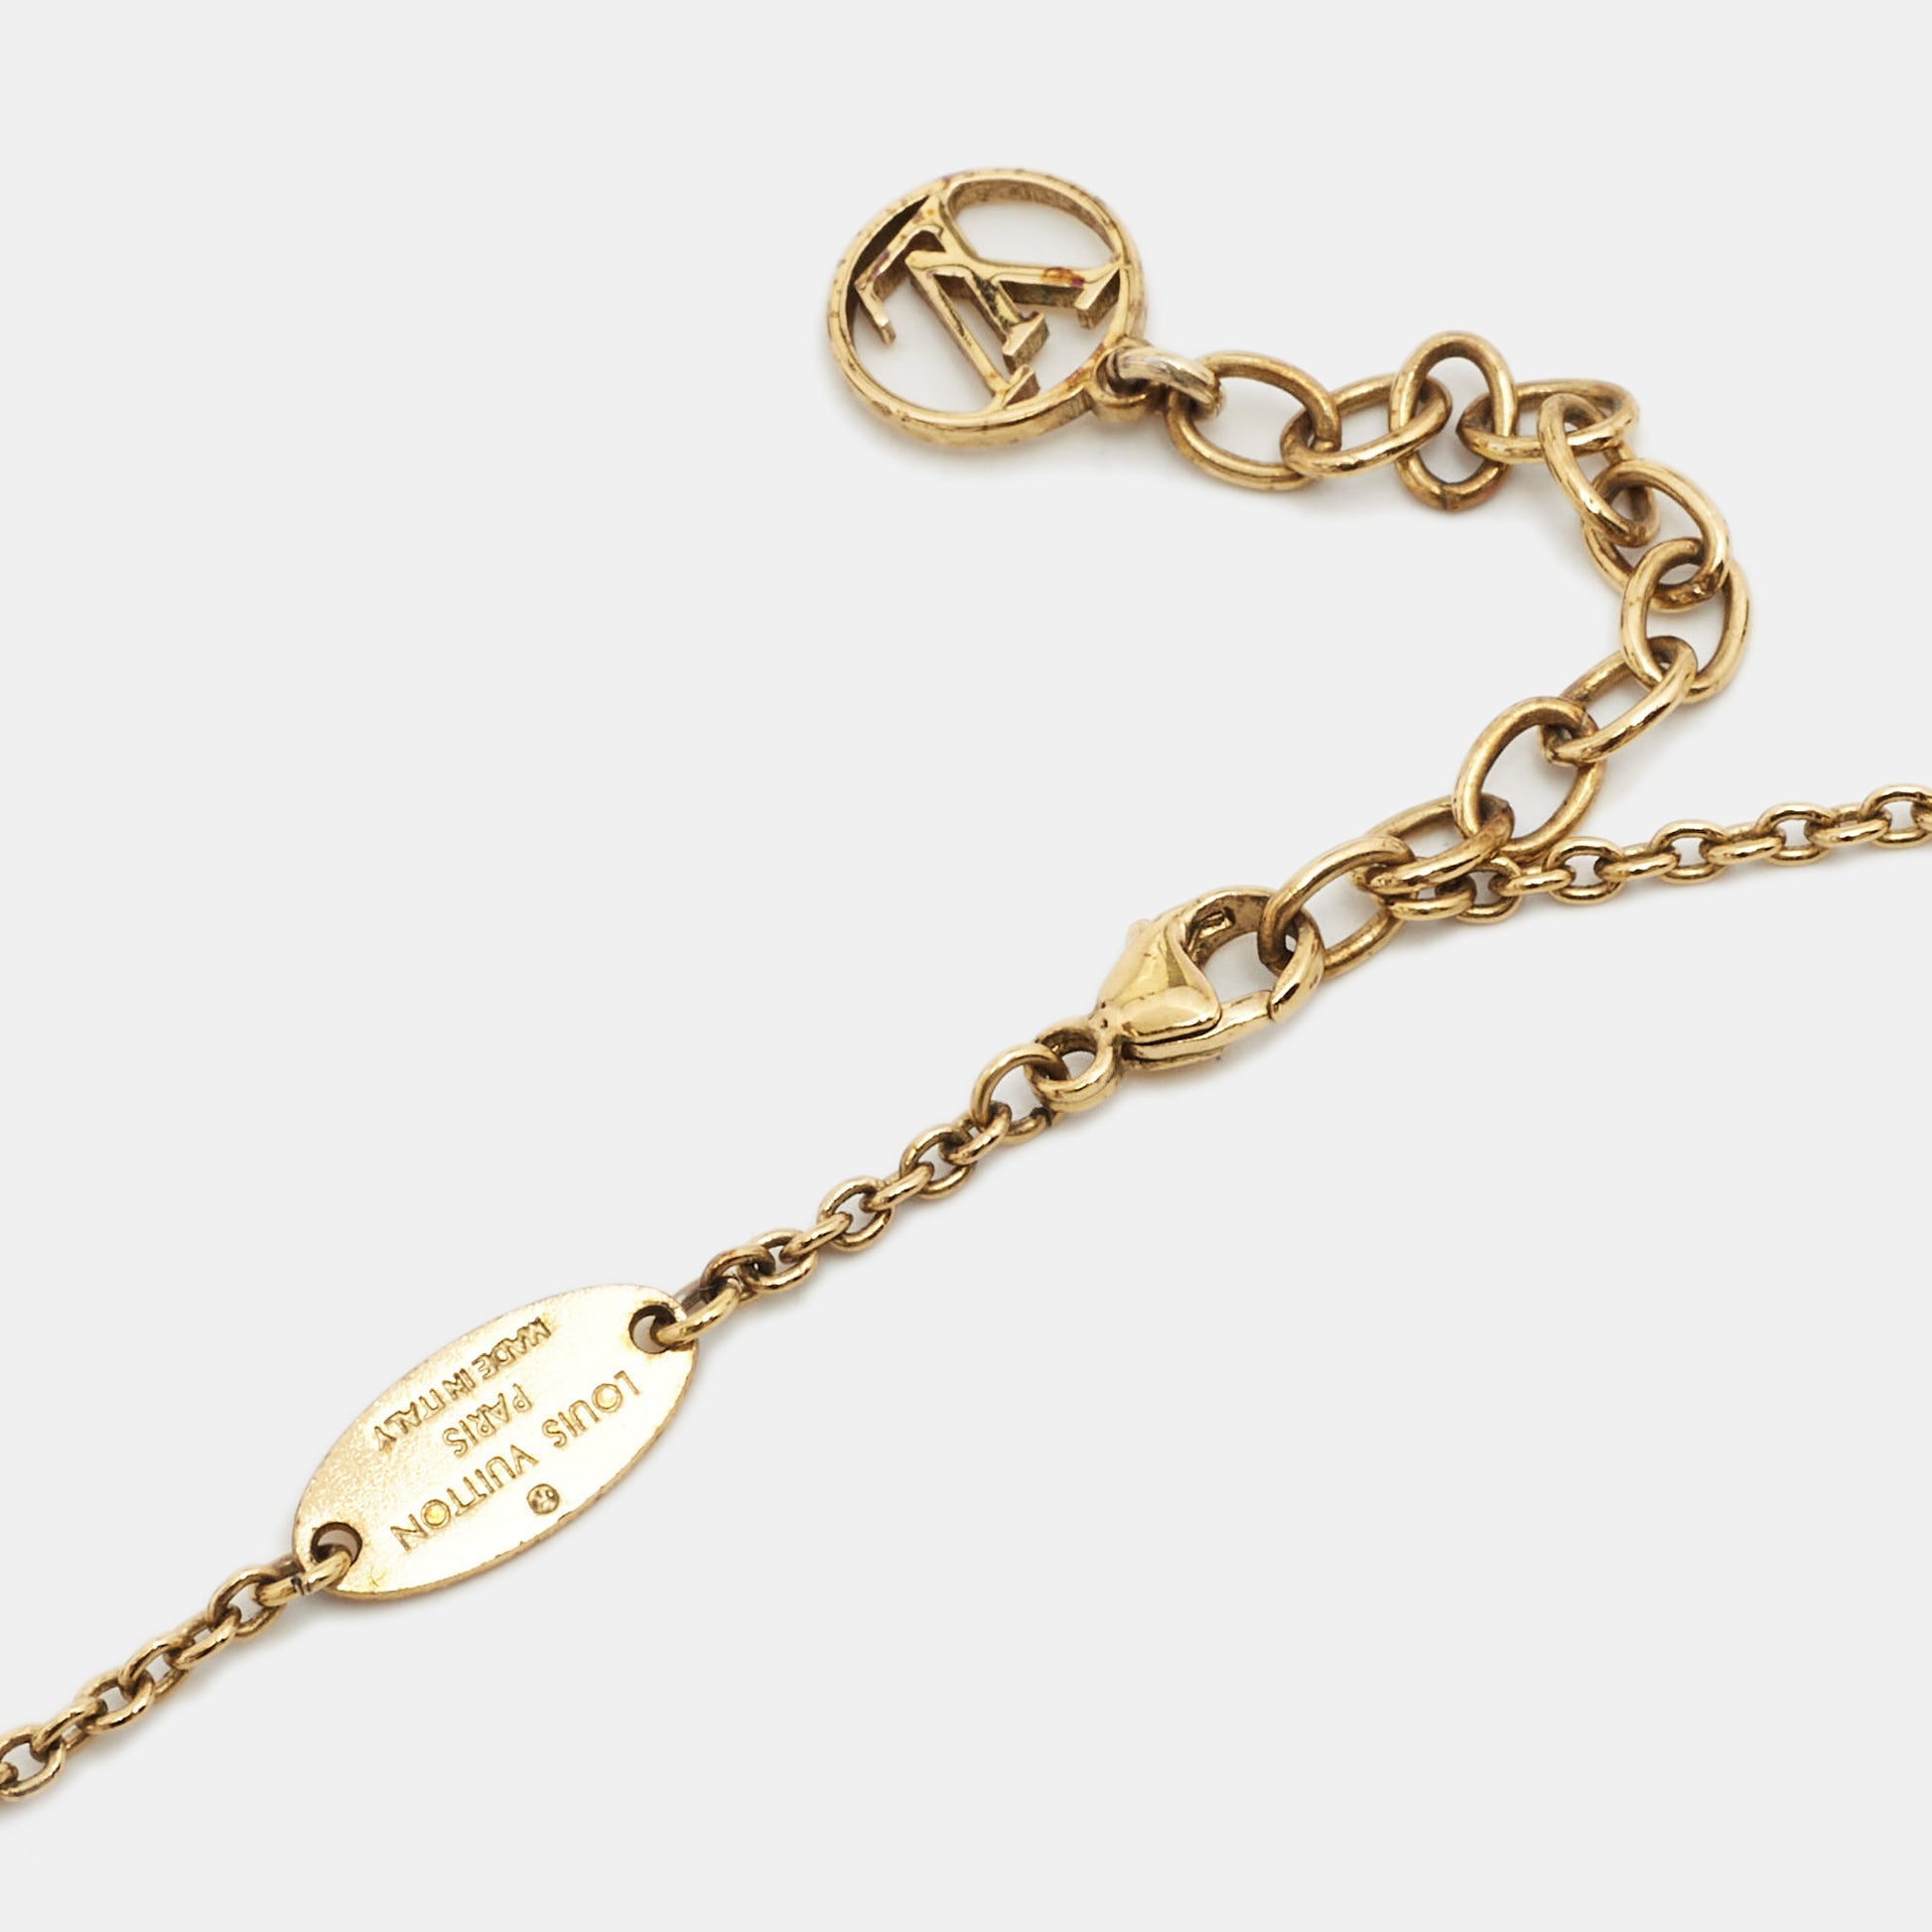 Essential v necklace Louis Vuitton Gold in Metal - 32899516